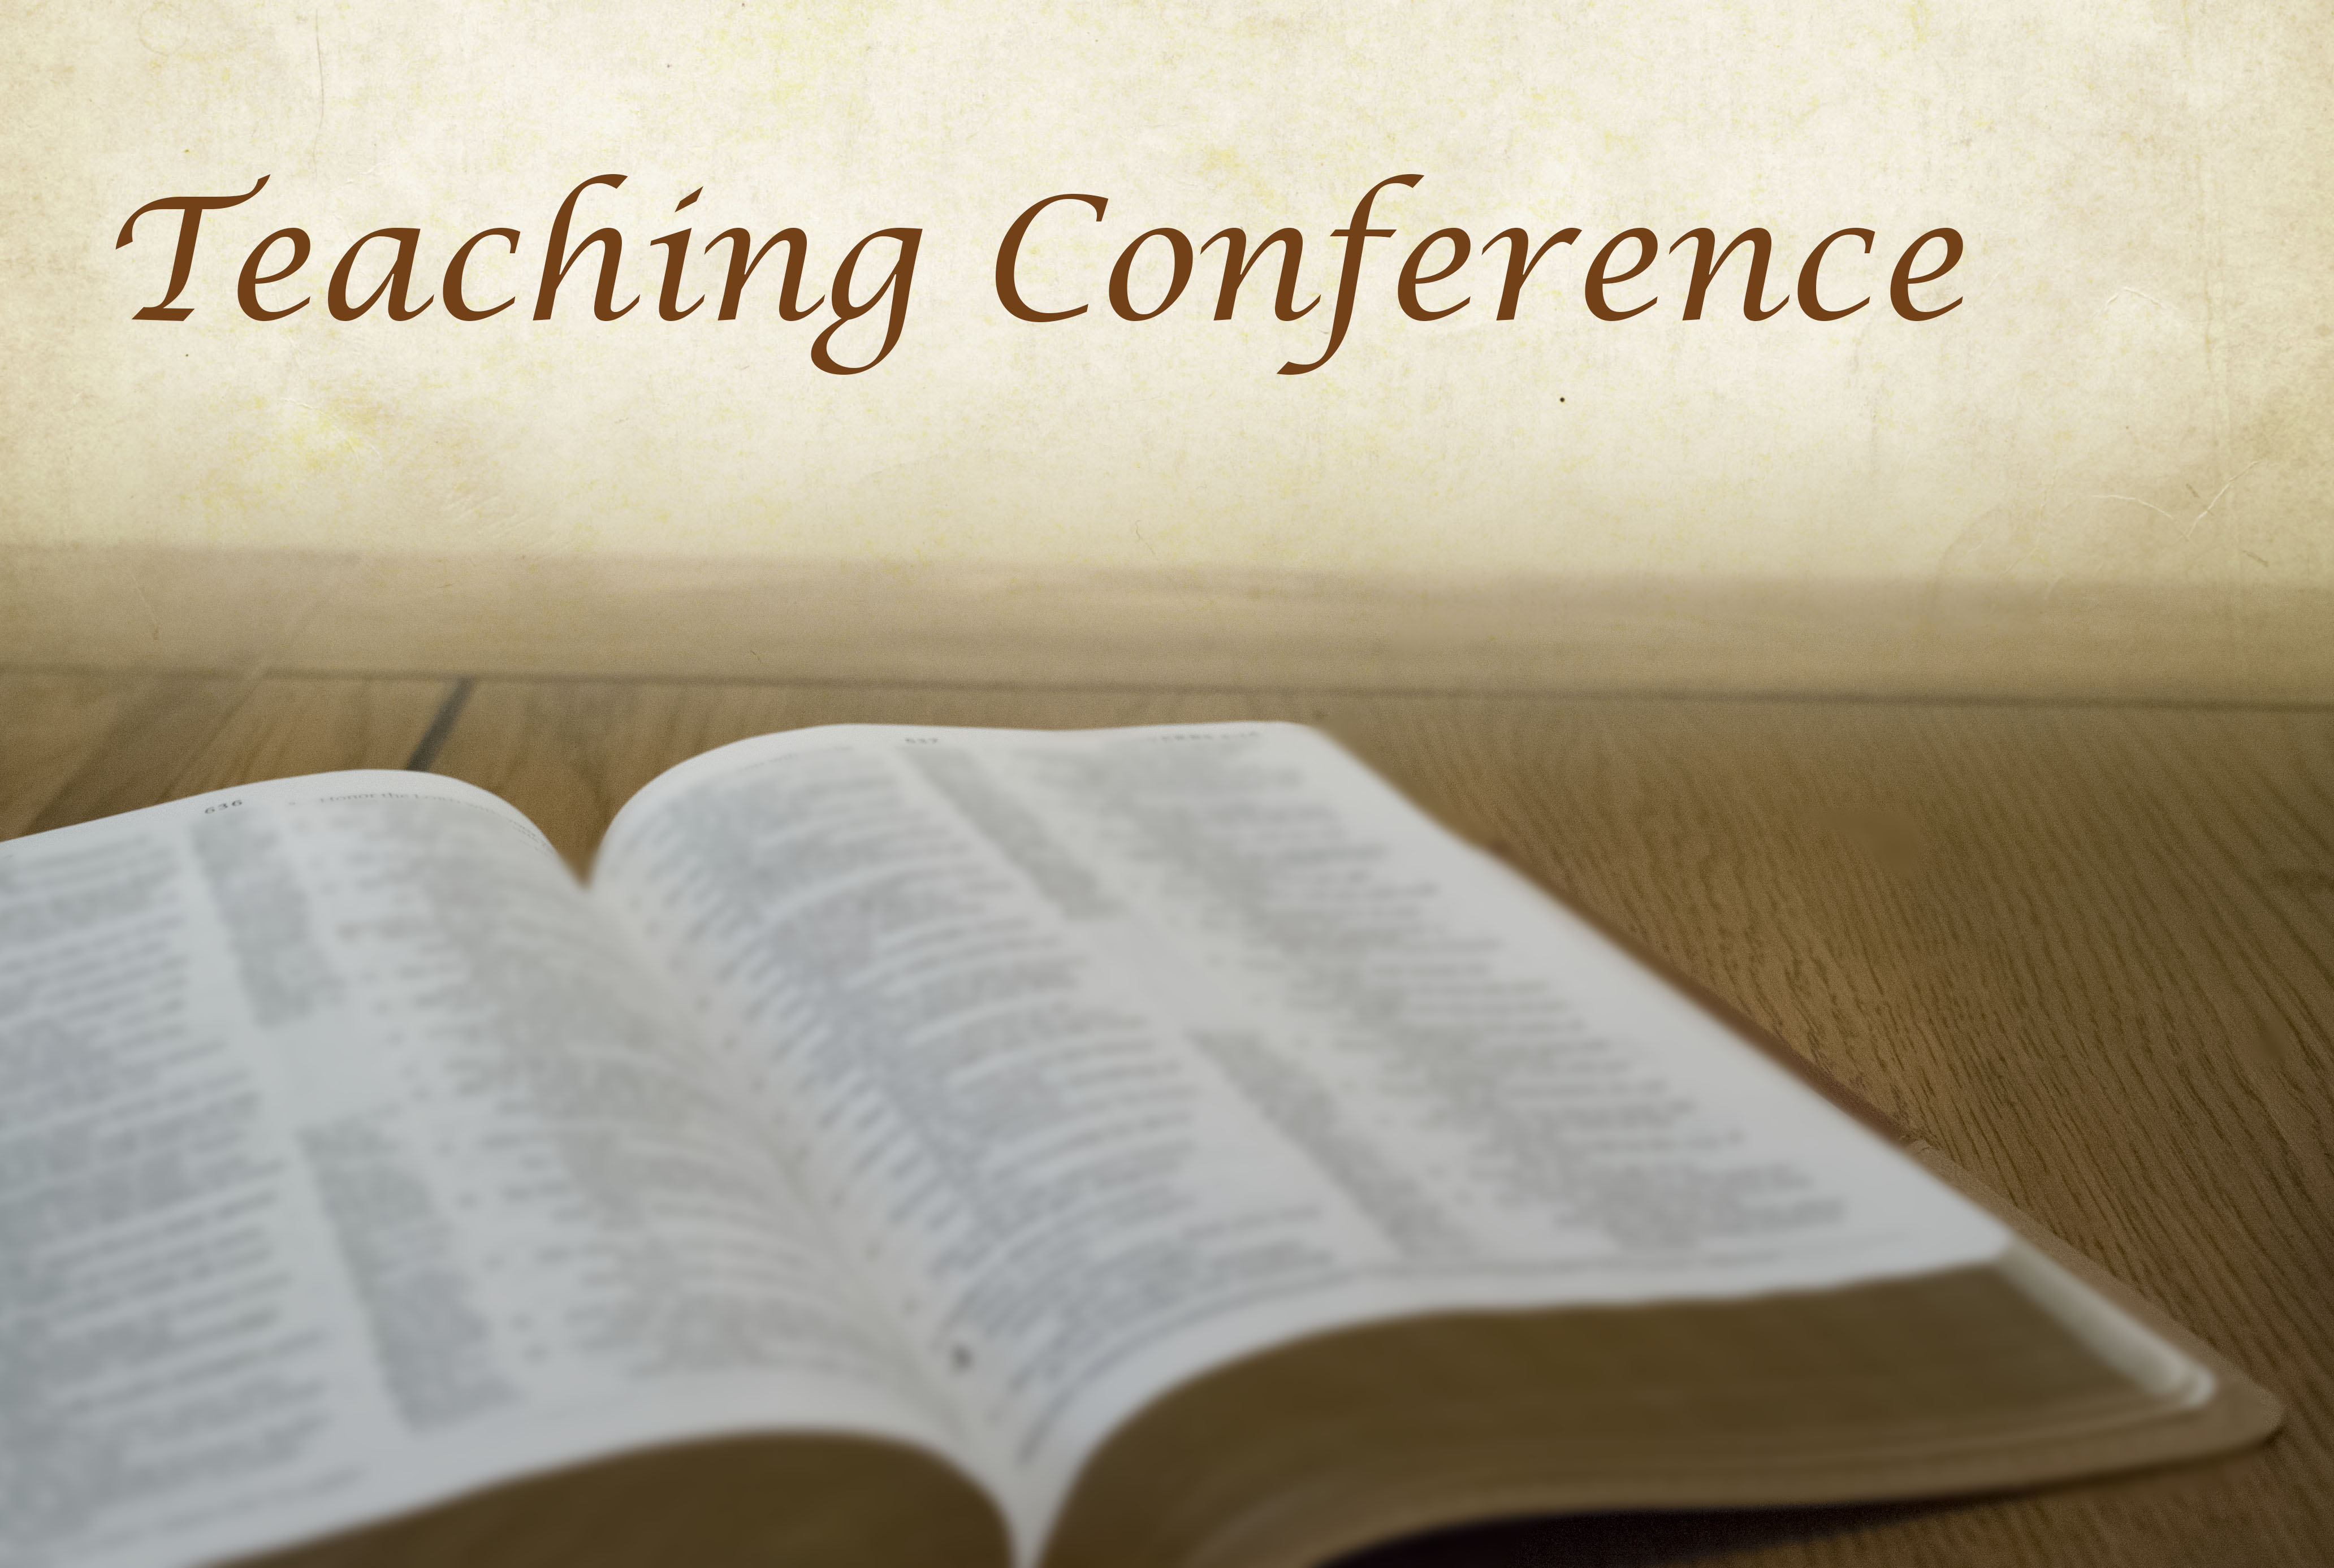 Teaching Conference banner